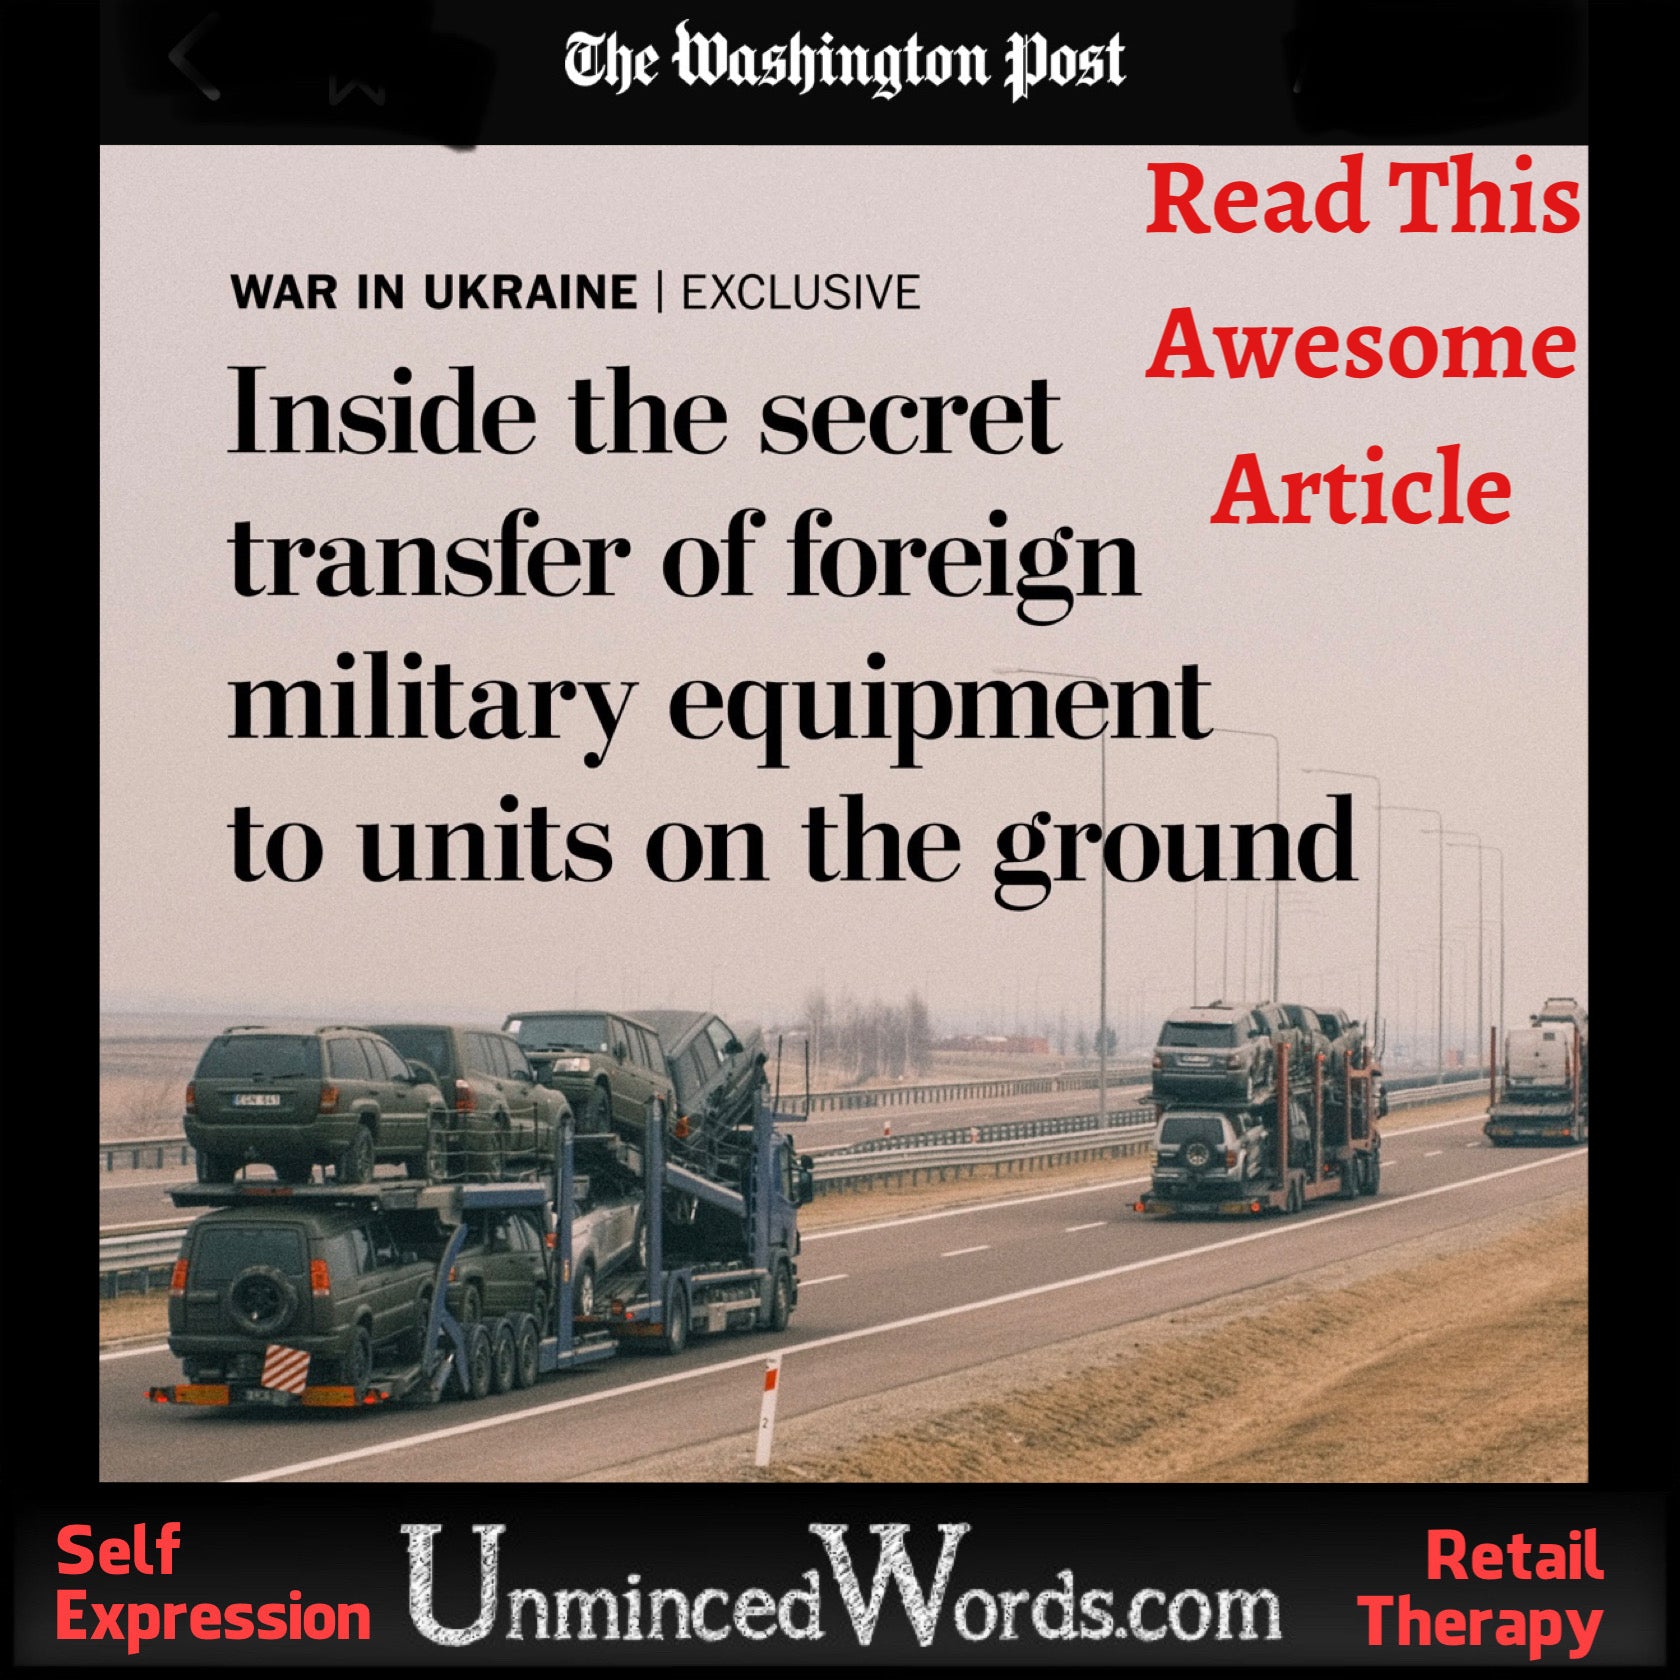 Inside the secret transfer of foreign military equipment to units on the ground